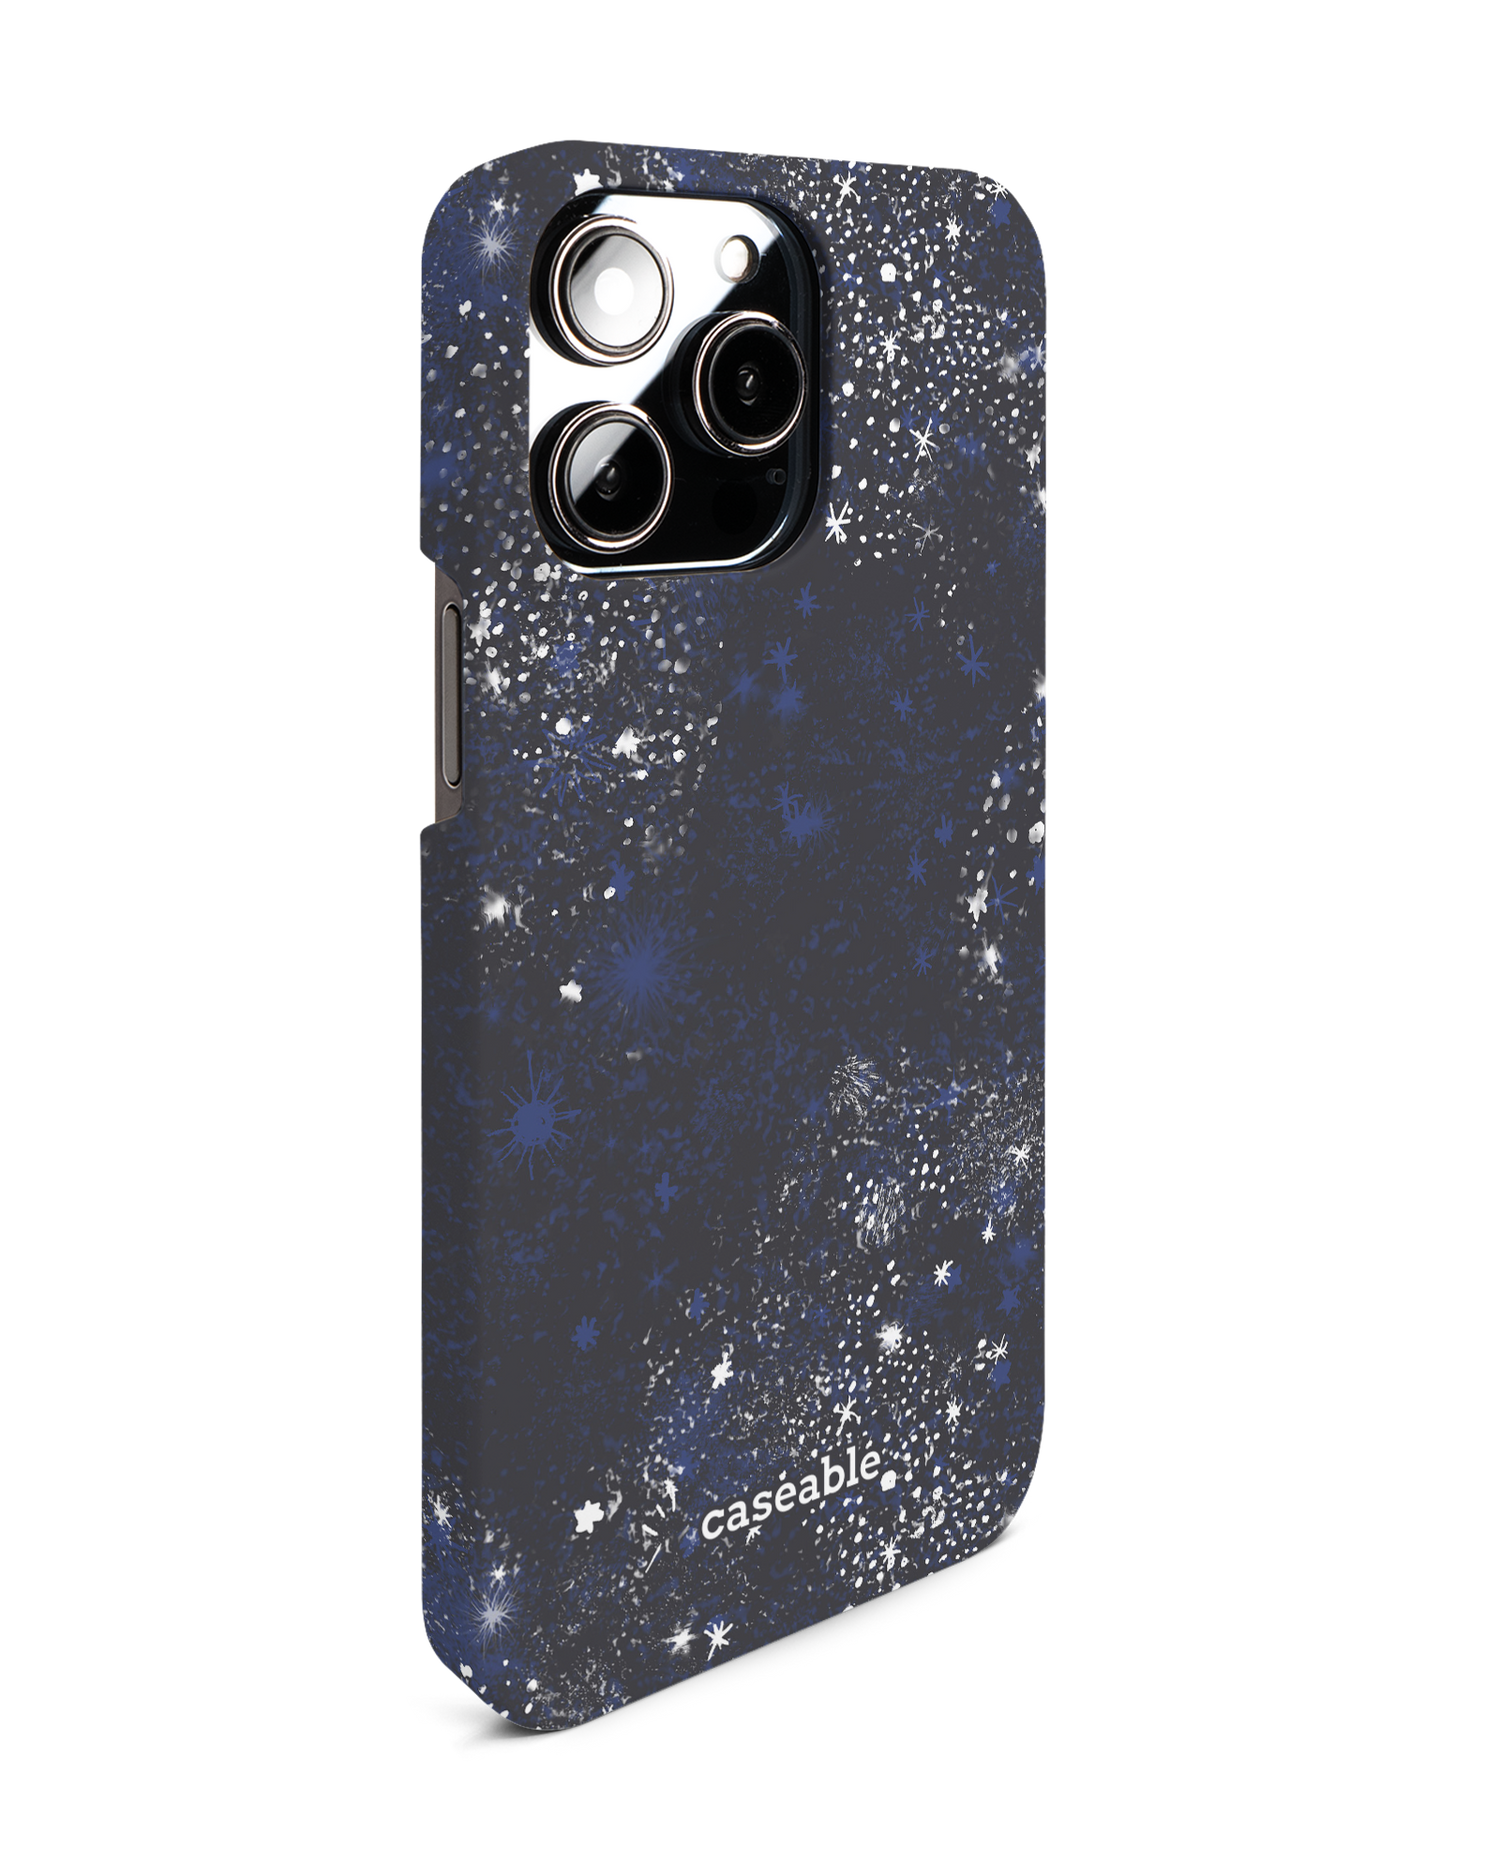 Starry Night Sky Hard Shell Phone Case for Apple iPhone 14 Pro Max: View from the left side